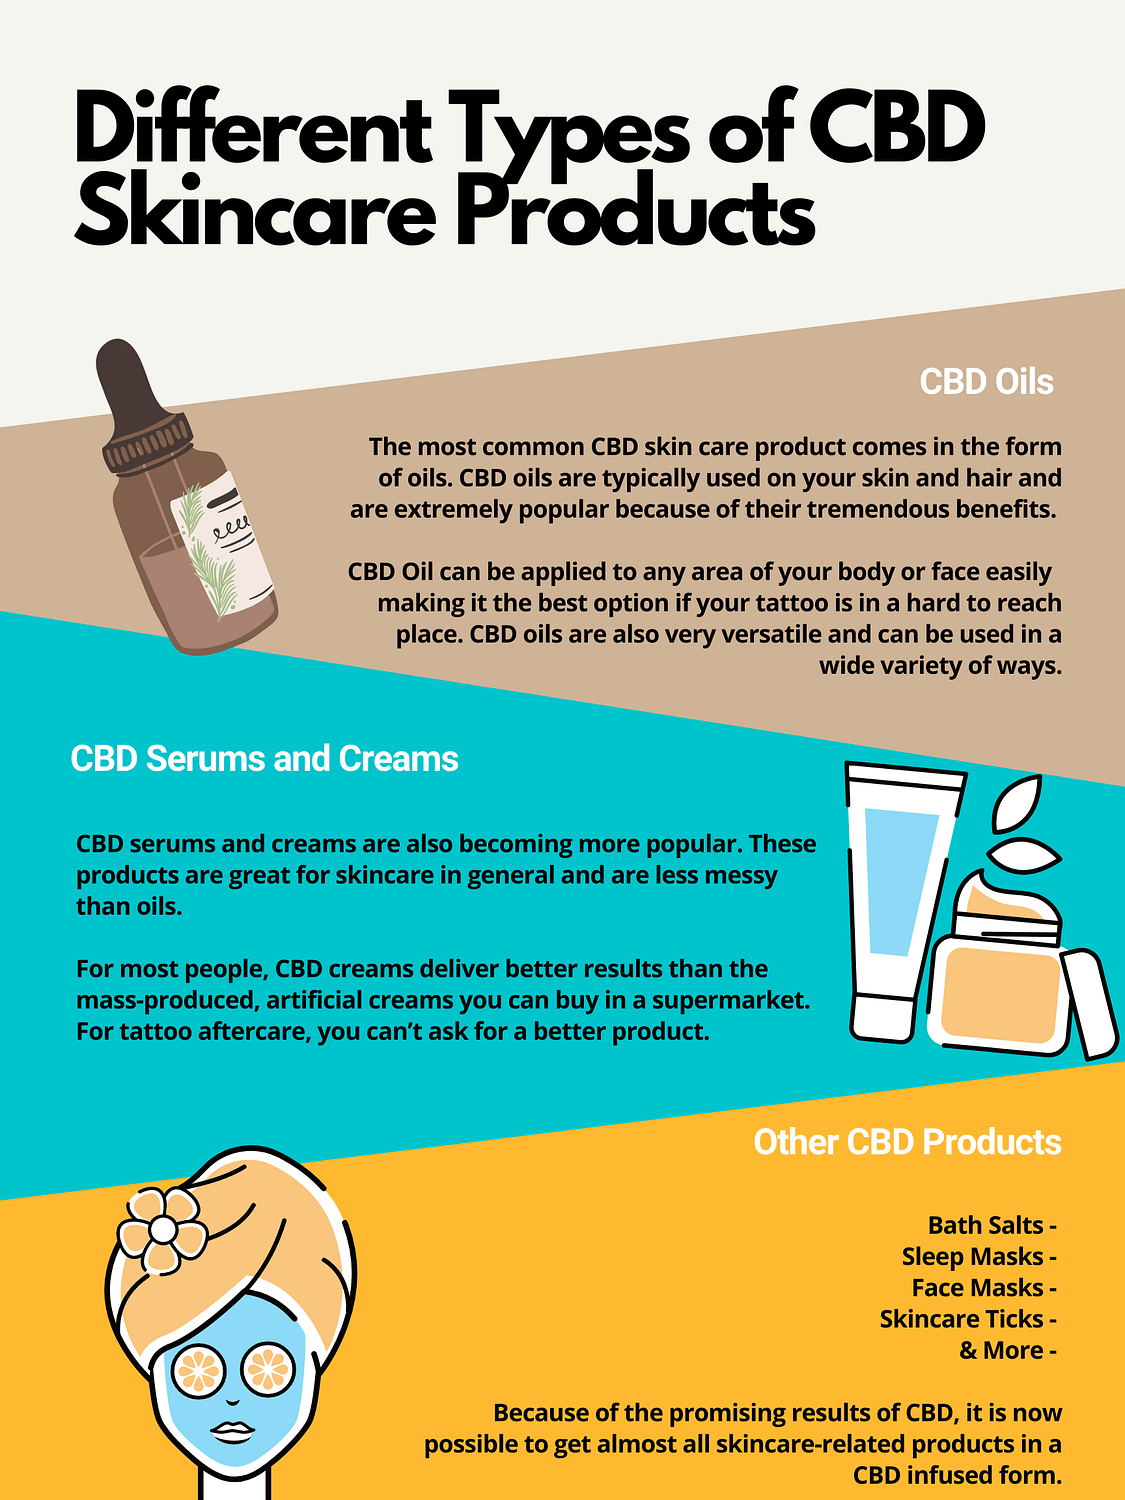 How CBD can help your skin